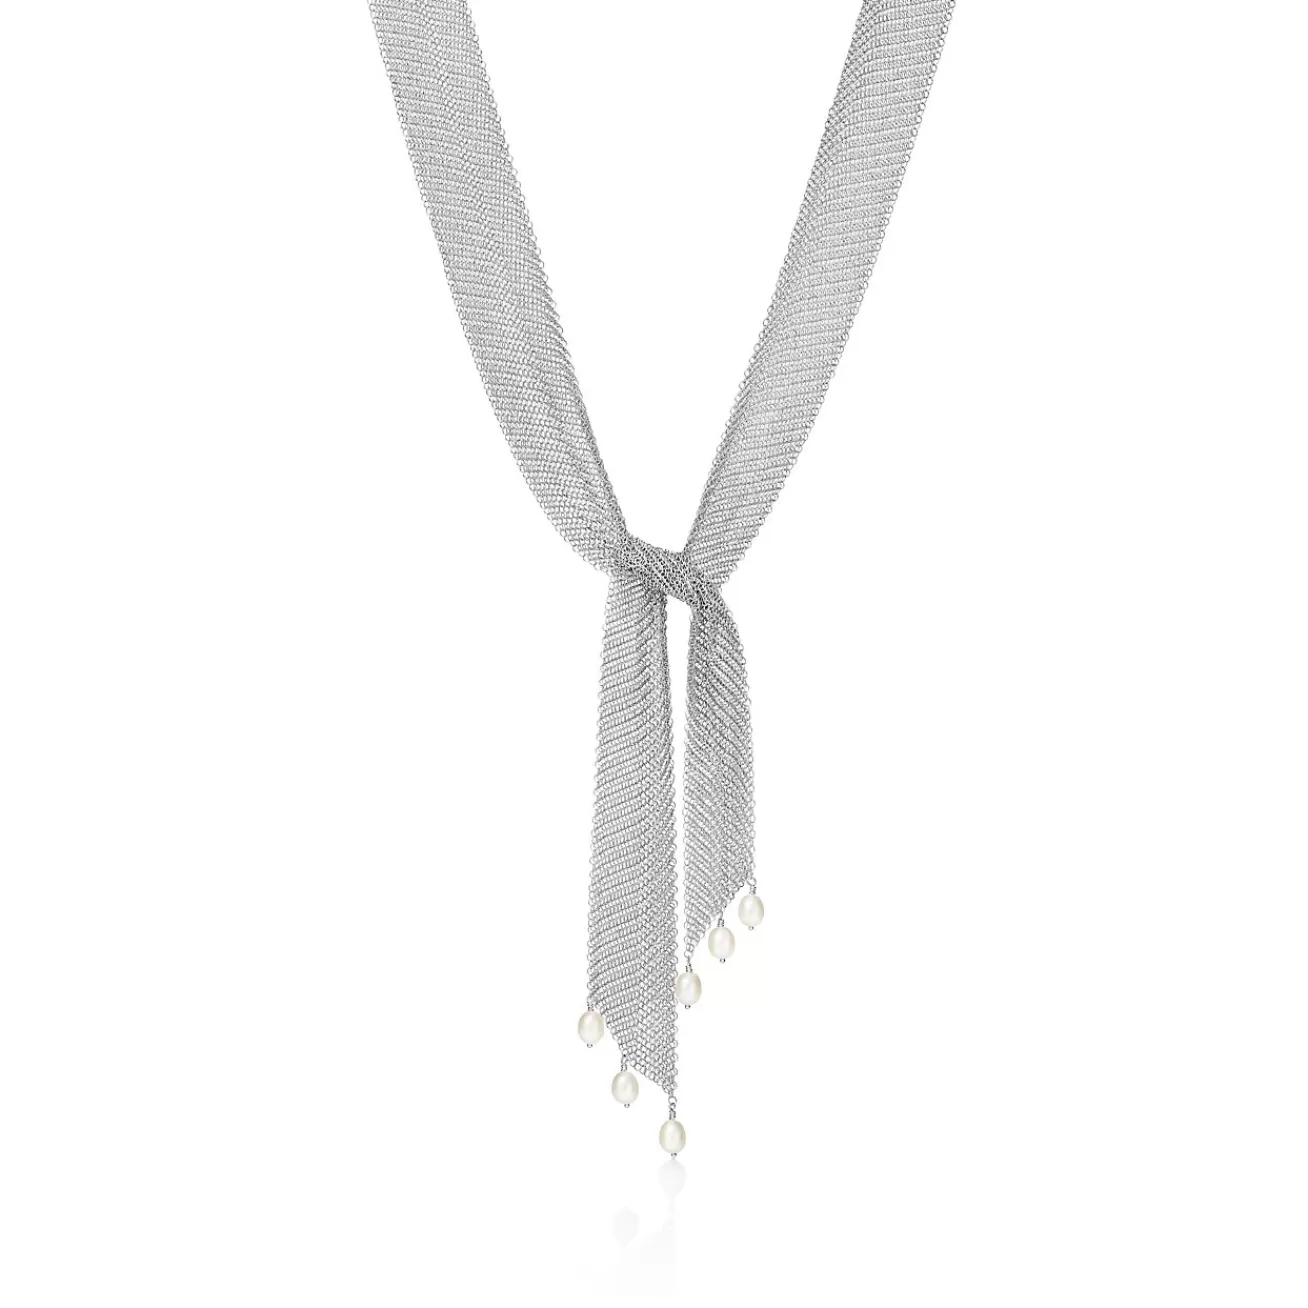 Tiffany & Co. Elsa Peretti® Mesh tie necklace in sterling silver with freshwater pearls. | ^ Necklaces & Pendants | Sterling Silver Jewelry